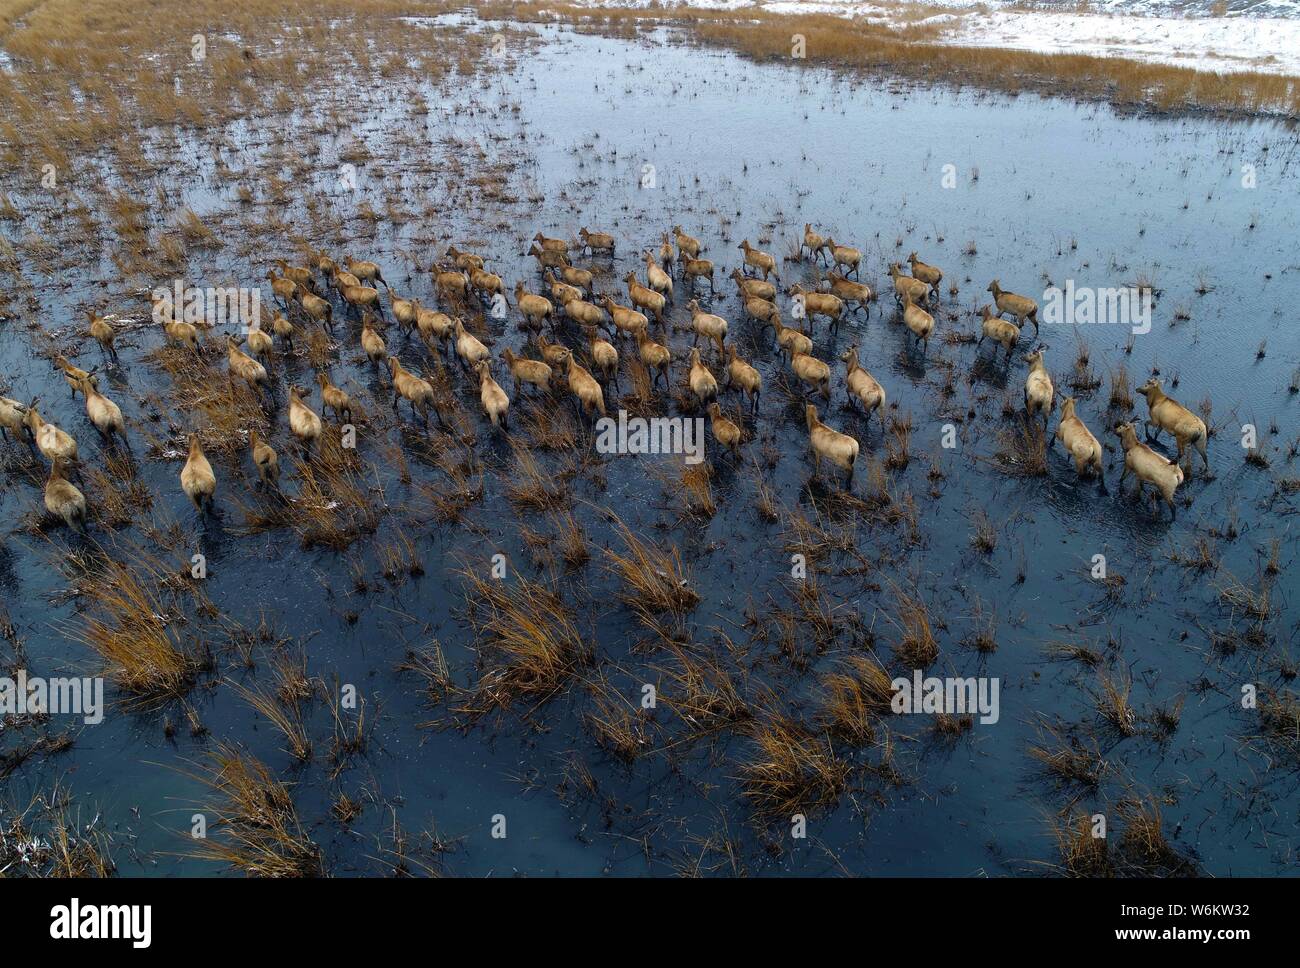 Aerial view of a flock of Pere David's deer, also known as the milu or elaphure, after a snowfall at the Dafeng Milu Nature Reserve in Dafeng district Stock Photo